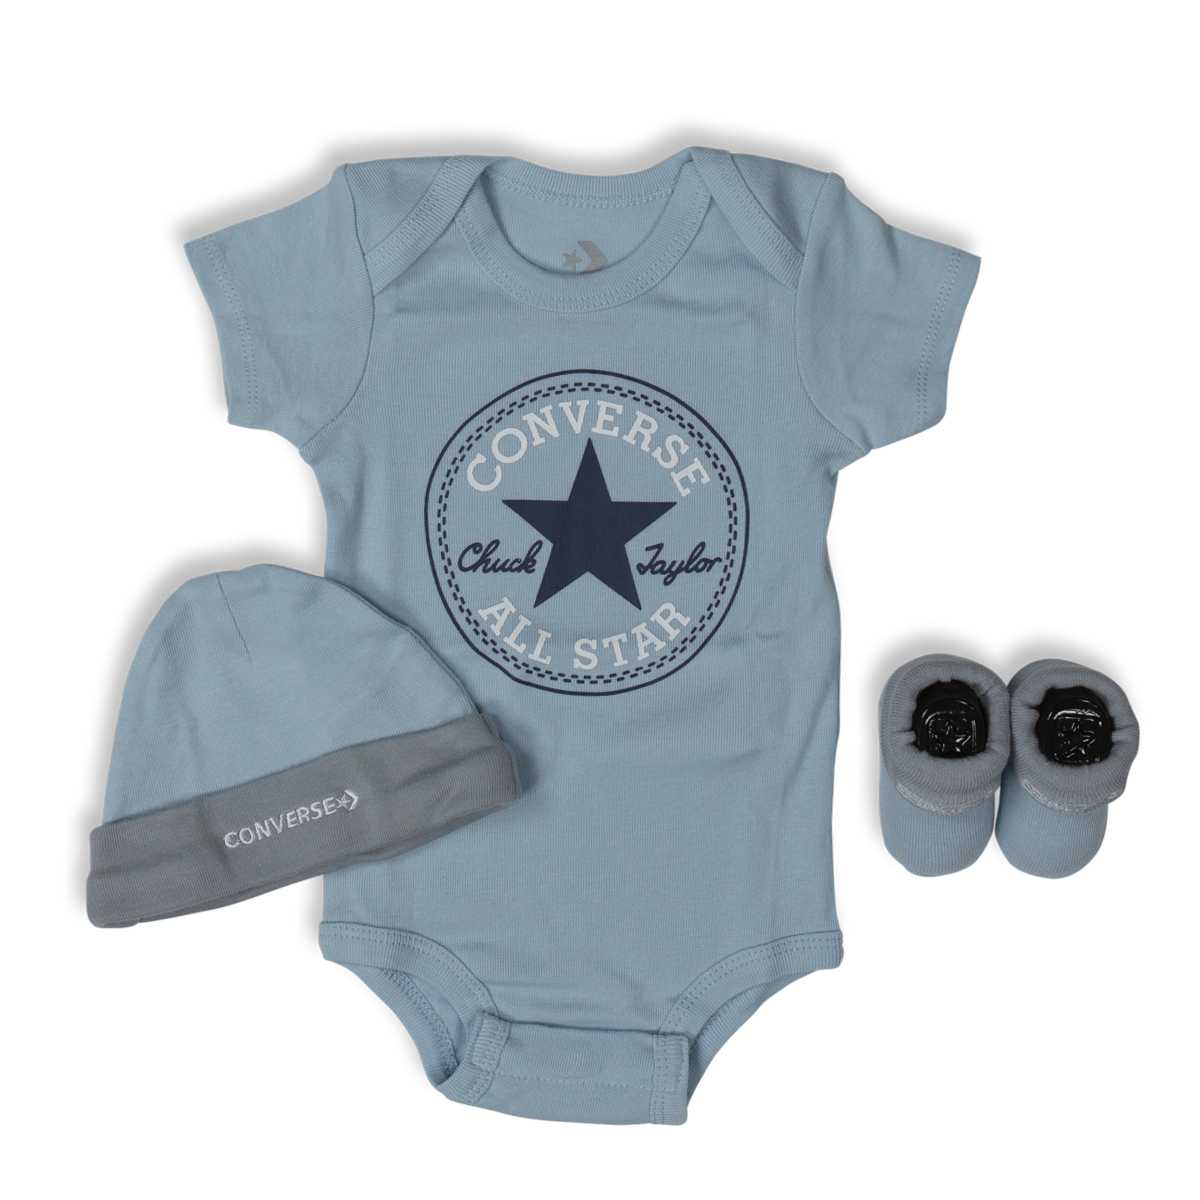 baby converse clothing